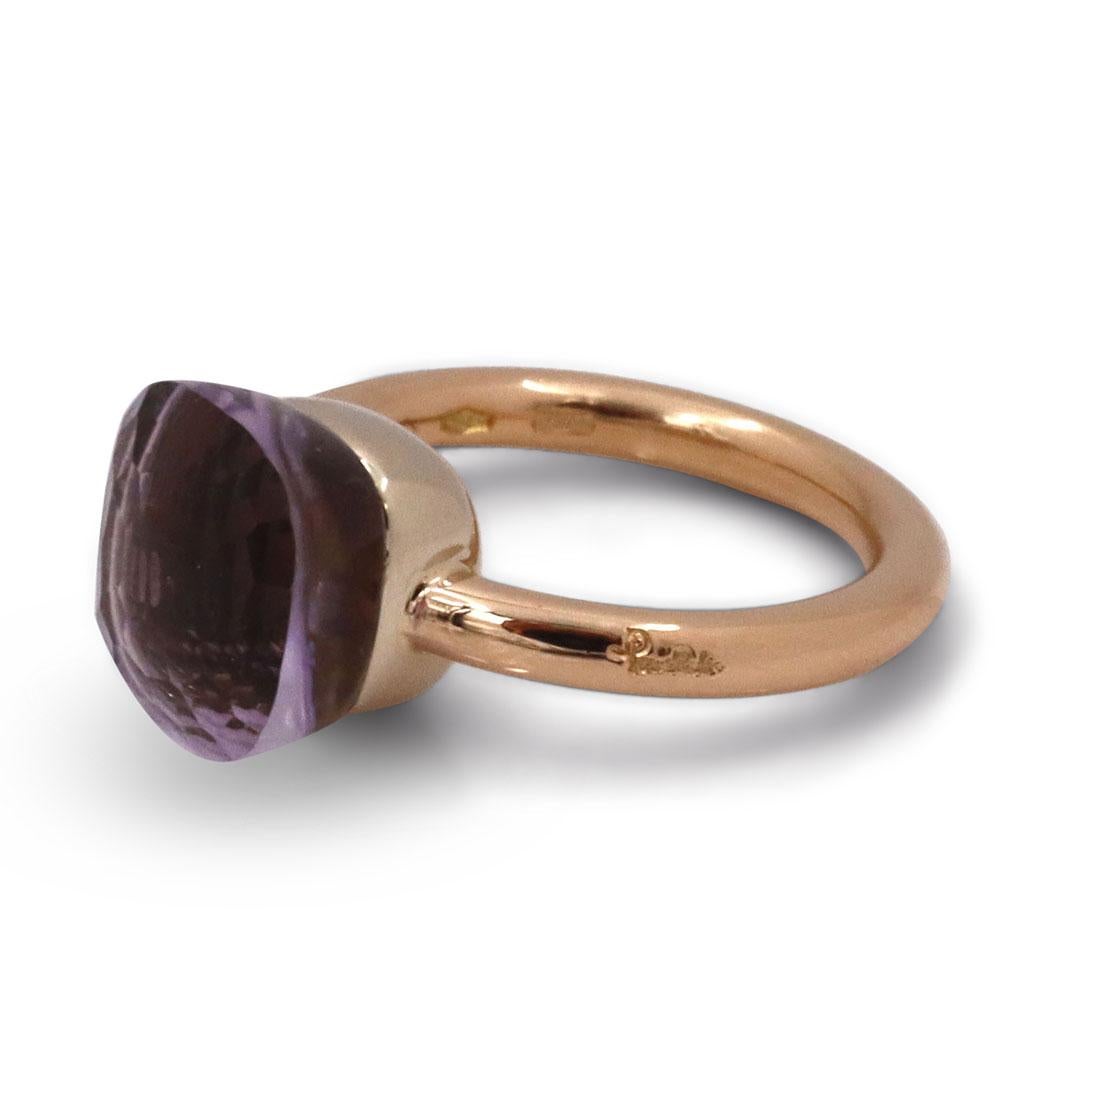 Authentic Pomellato Nudo ring crafted in 18 karat yellow gold and featuring a faceted purple Quartz stone measuring 10.4mm x 10.4mm. Signed Pomellato. Ring size 6. Not presented with original box or papers. CIRCA 2010s

Brand: Pomellato
Collection: